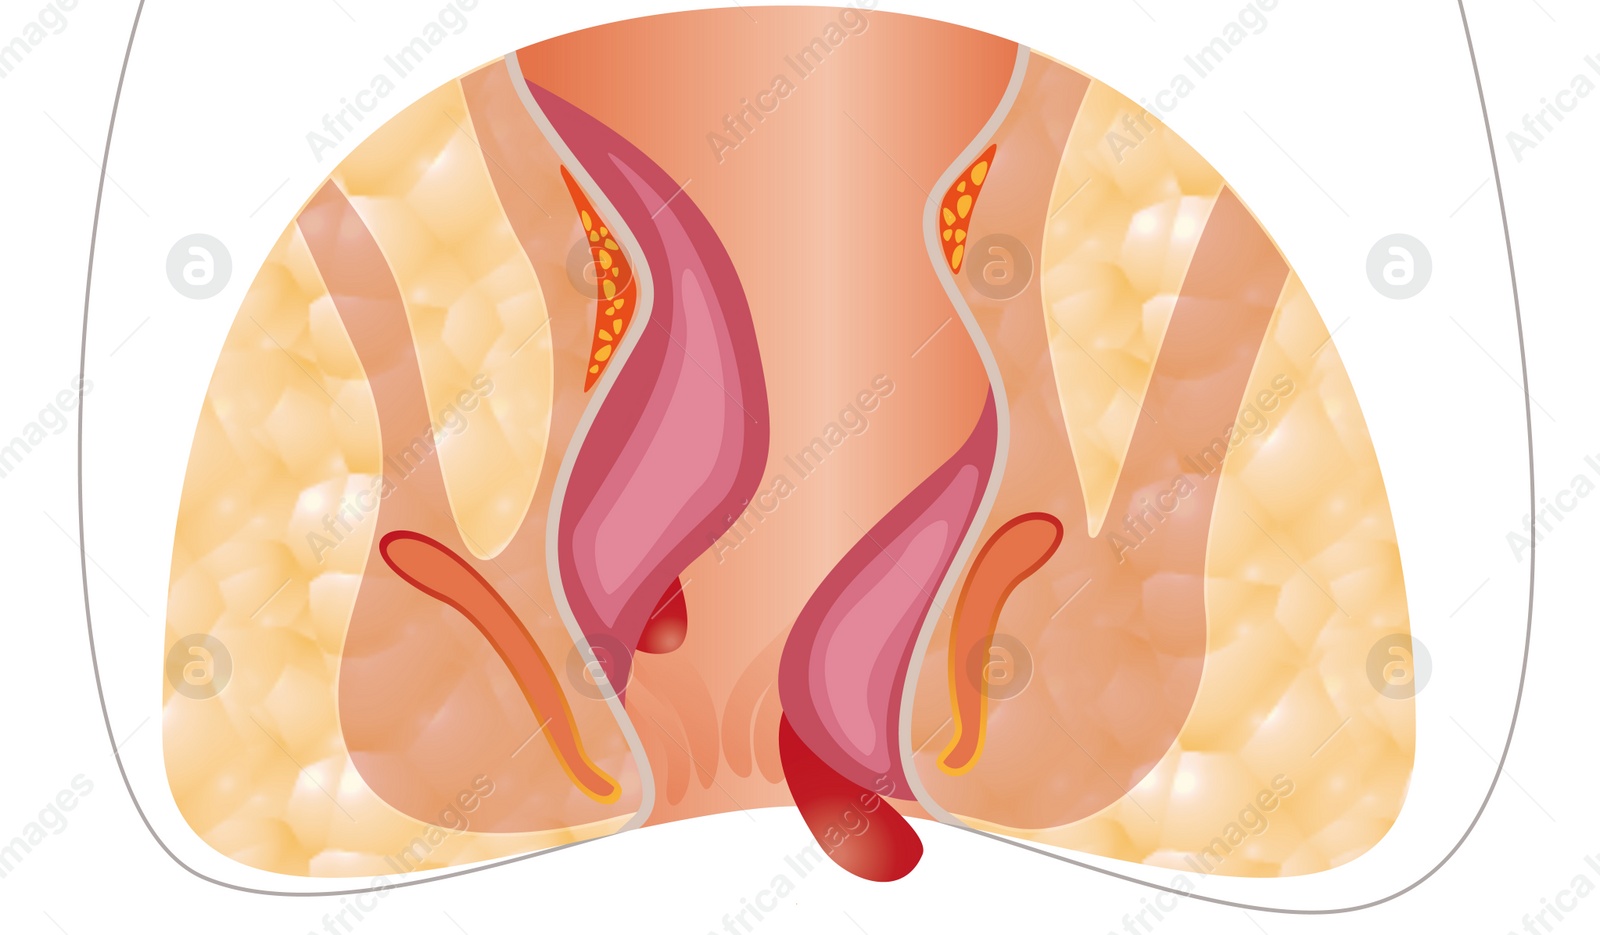 Image of Hemorrhoid. Unhealthy lower rectum with inflamed vascular structures, illustration